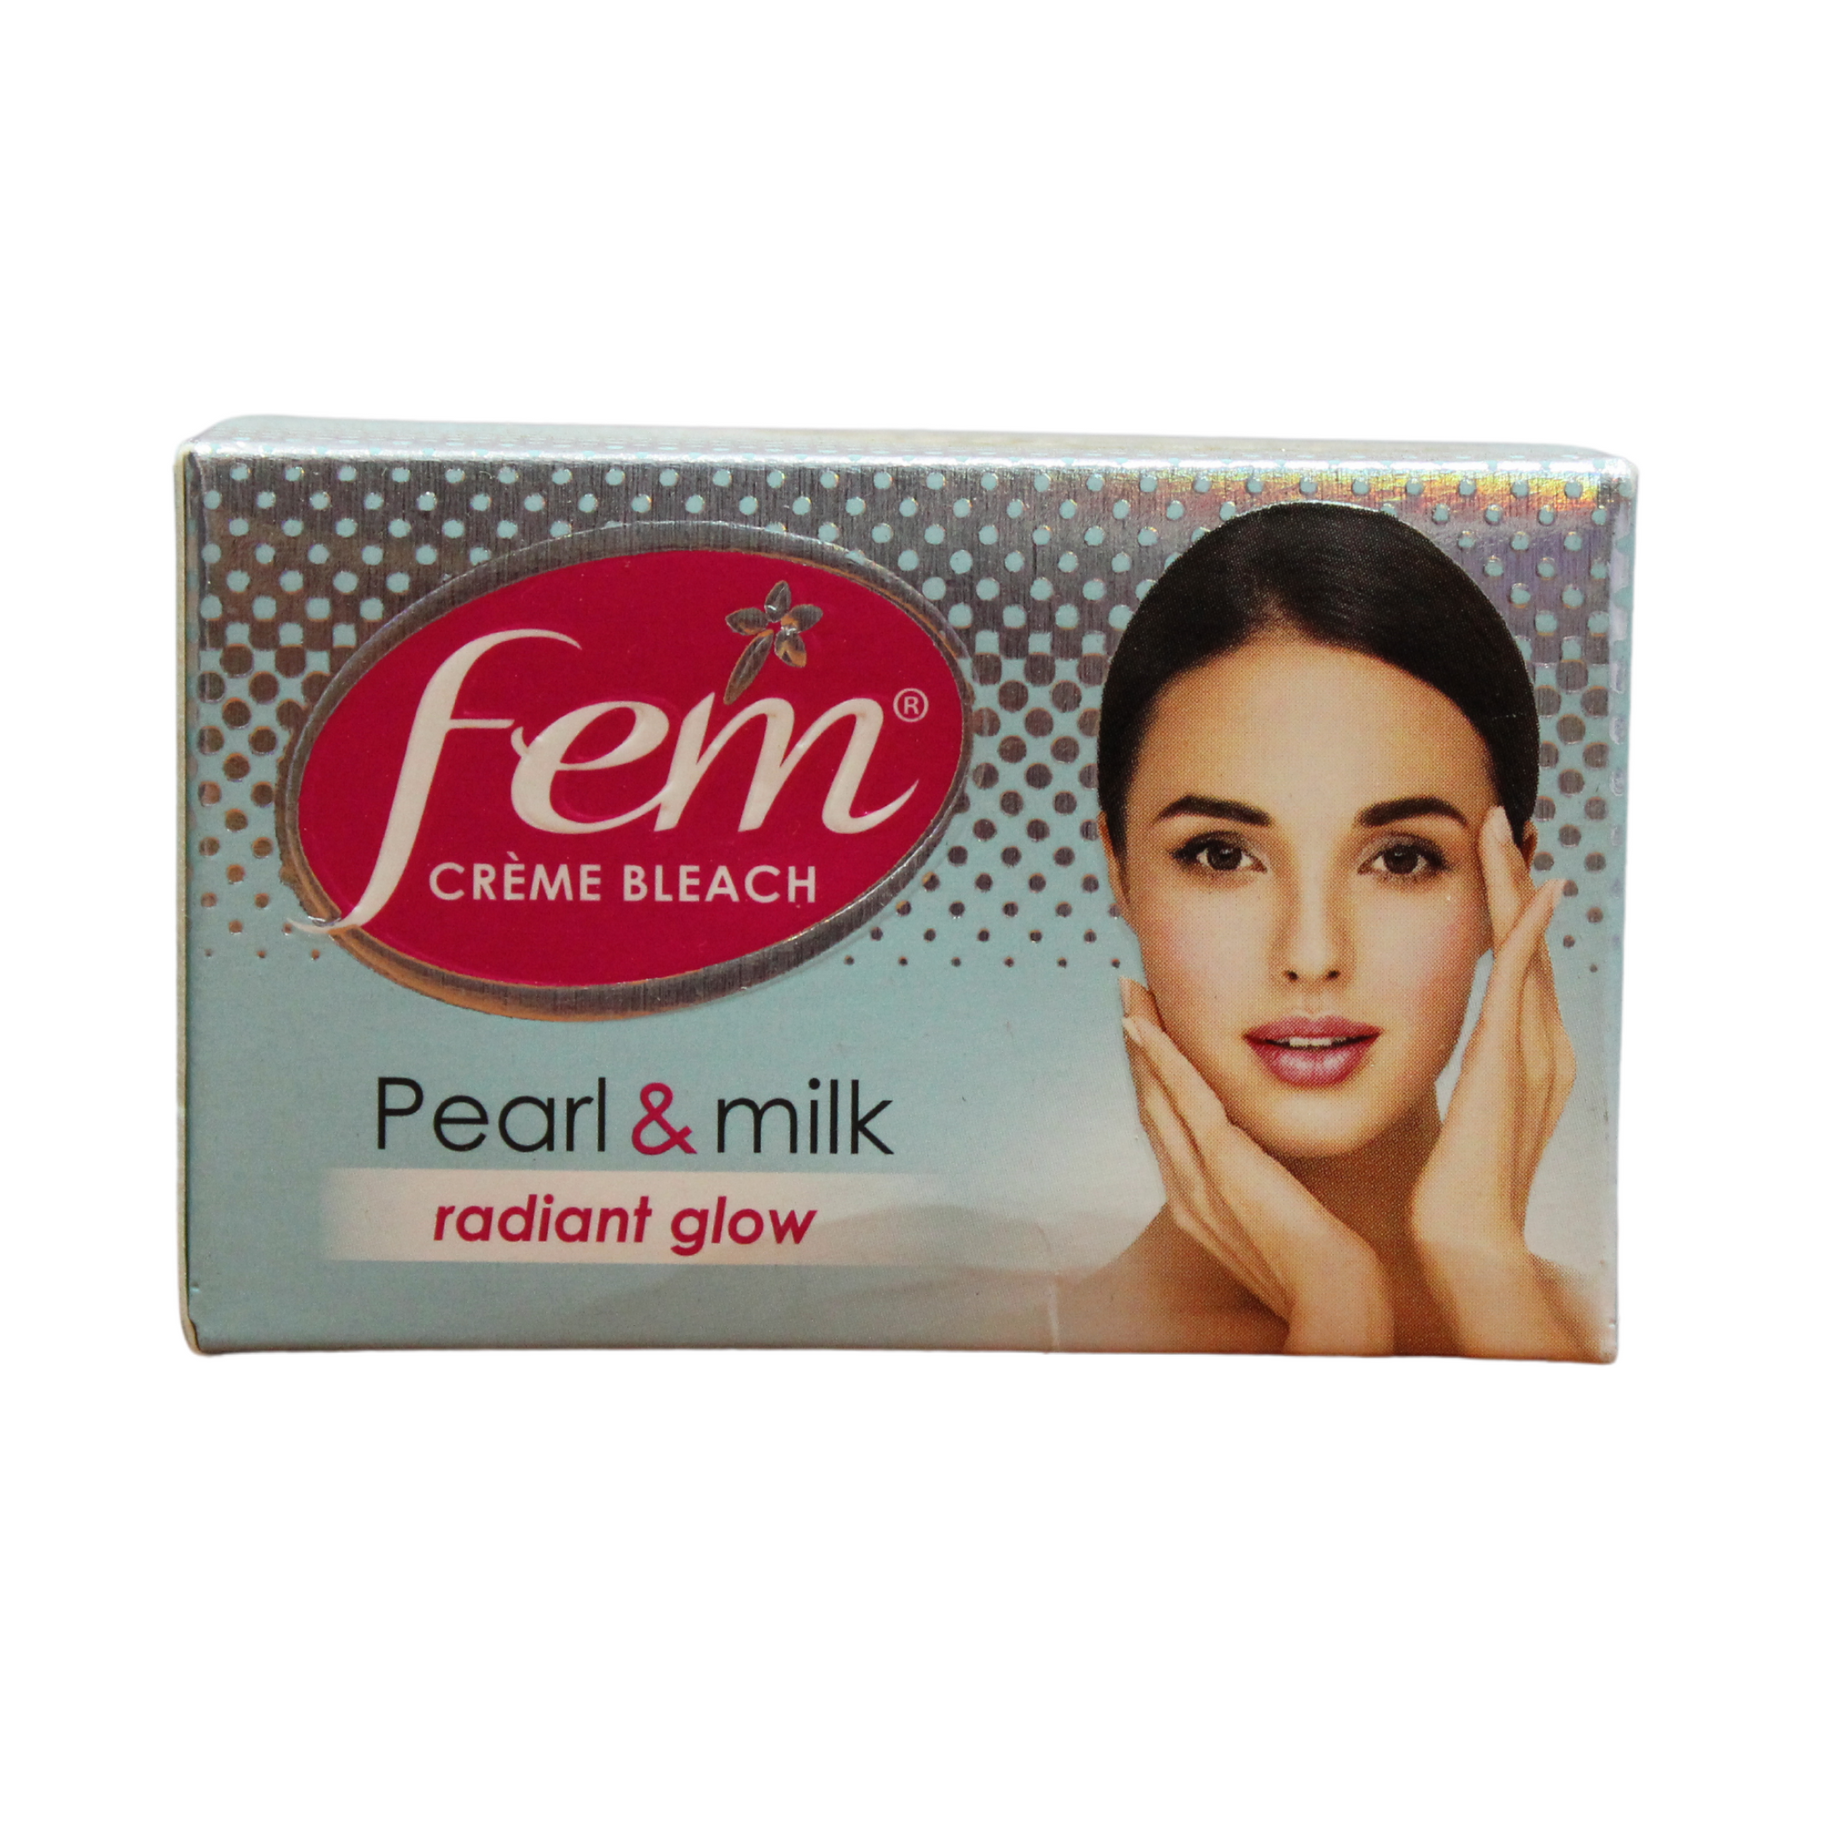 Shop Fem creme bleach - Pearl and milk - 24gm at price 57.00 from Dabur Online - Ayush Care